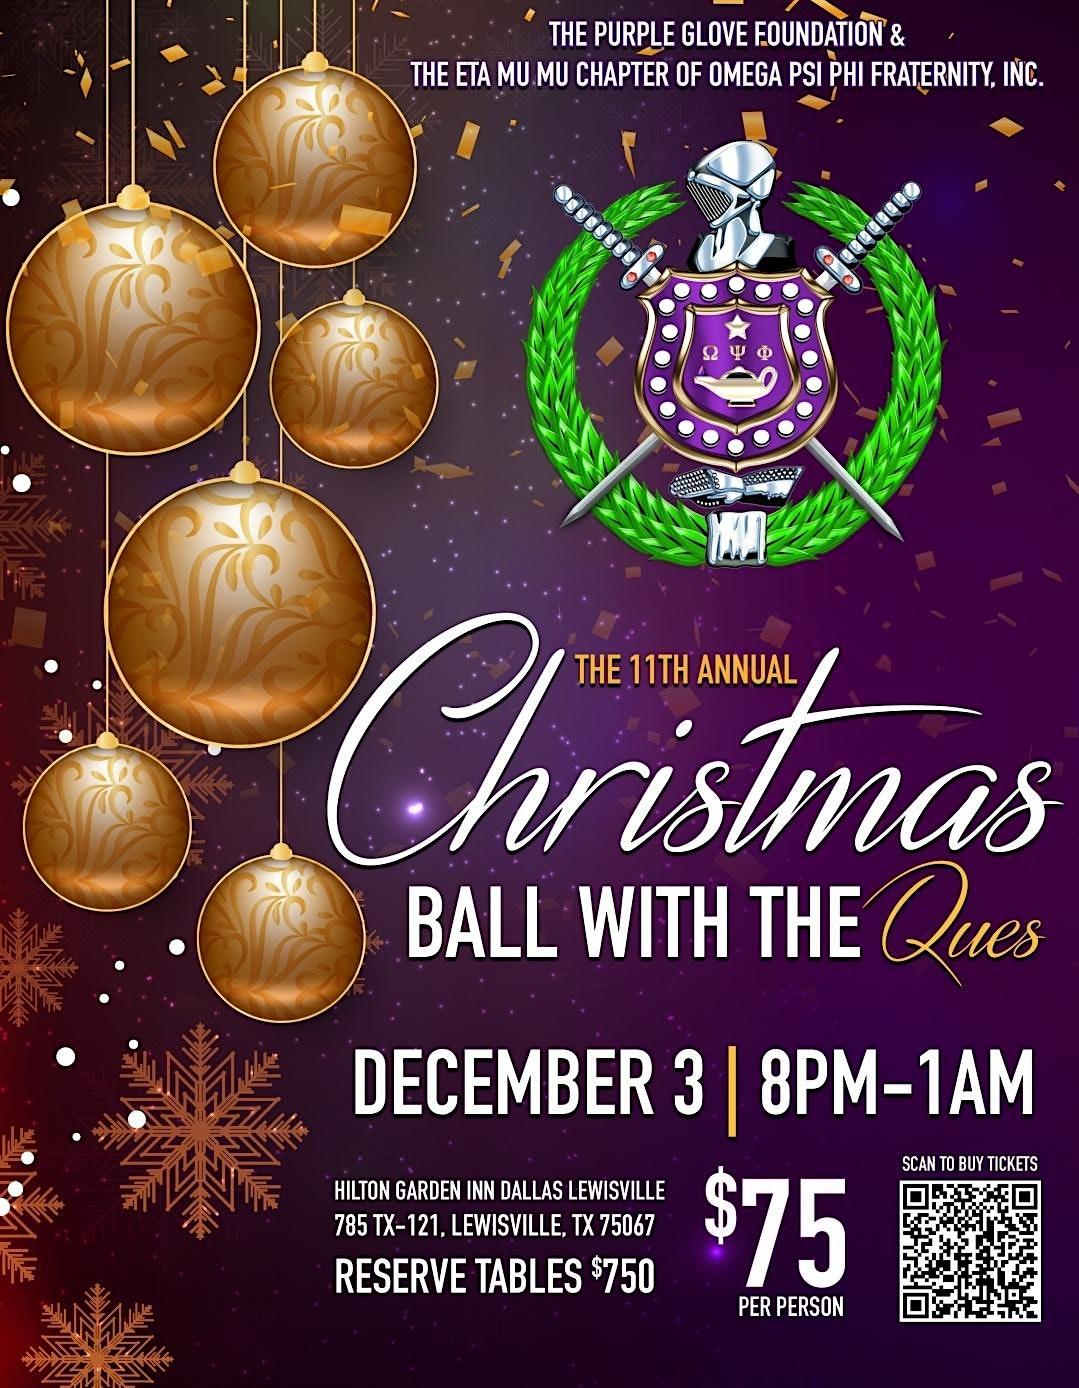 11th Annual Scholarship Gala - Christmas with the Ques
Sat Dec 3, 8:00 PM - Sun Dec 4, 1:00 AM
in 43 days